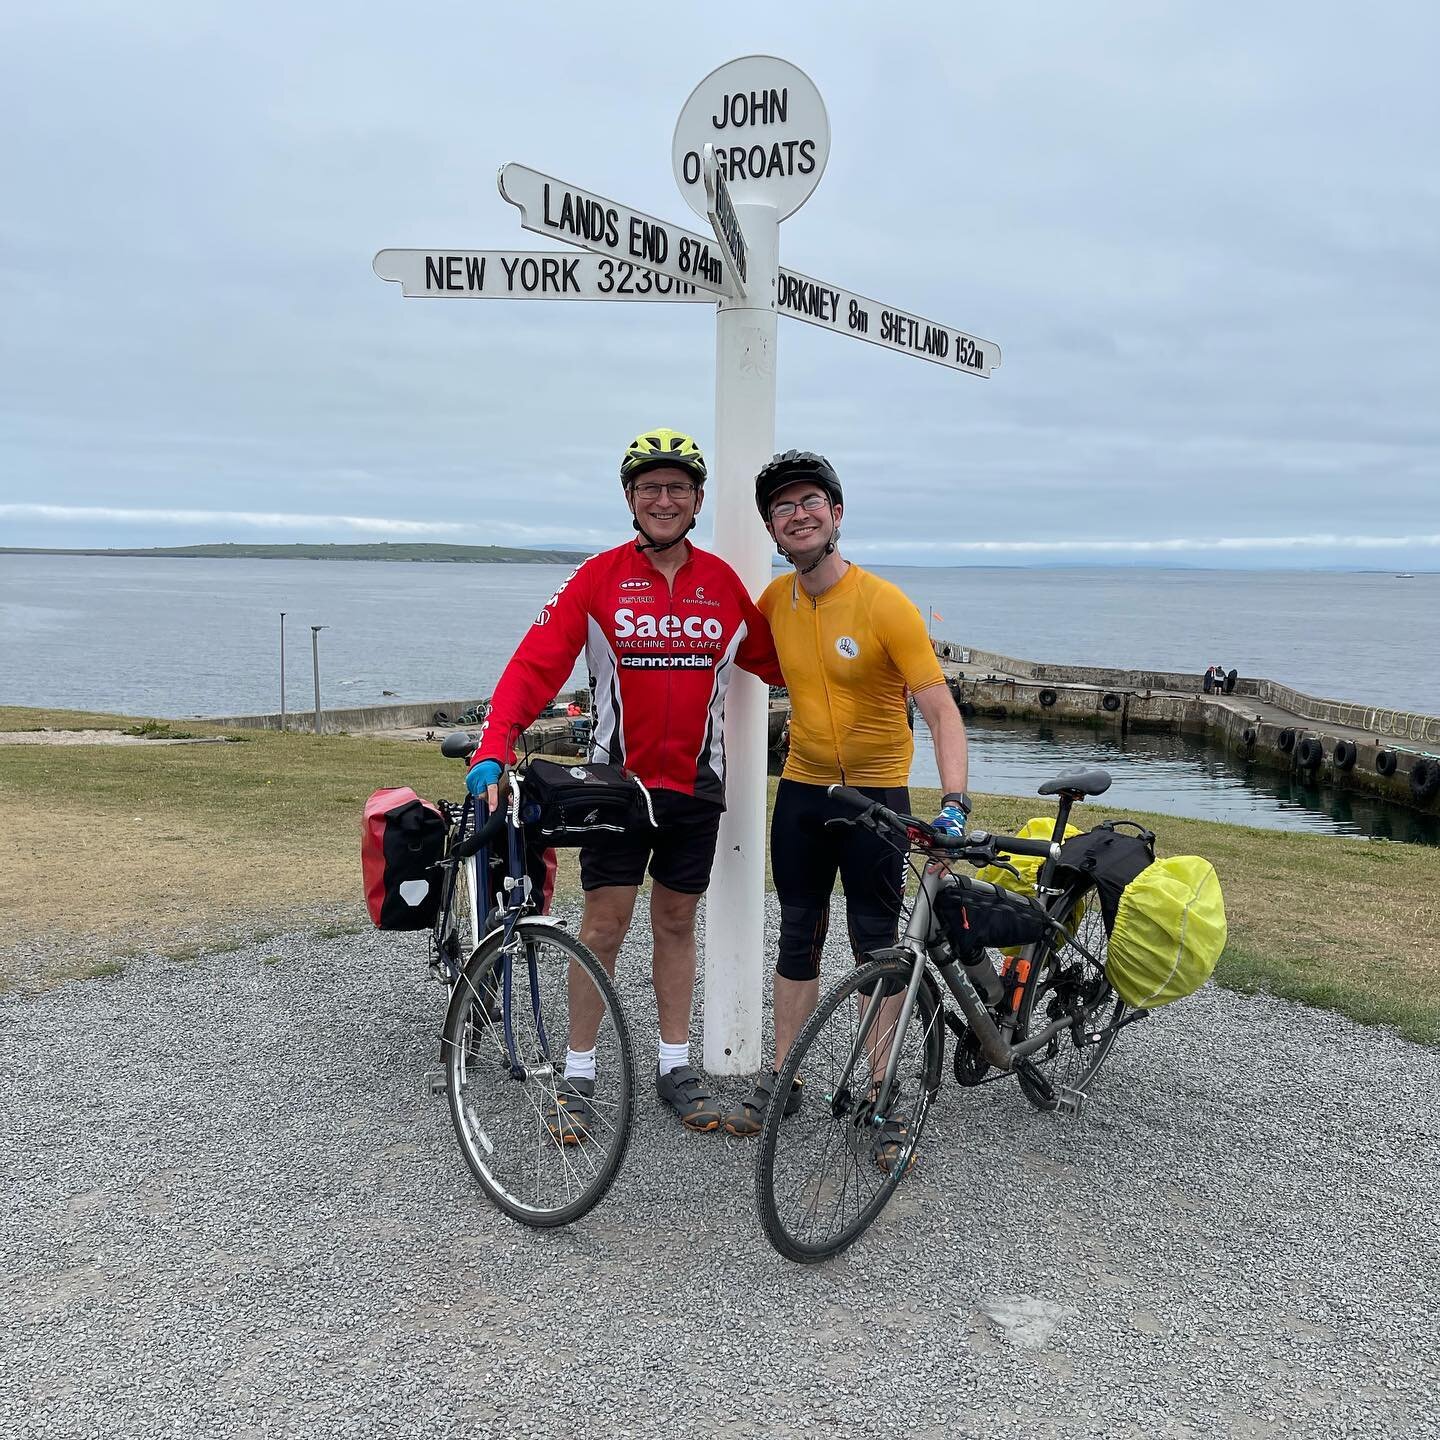 Completed it! 18 days on the bike, about 1000 miles, all the way from the bottom to the top of the UK!

There&rsquo;s a link in my bio for my @mindcharity Just Giving page, if you&rsquo;re feeling generous. 

It was an incredible adventure and a jour